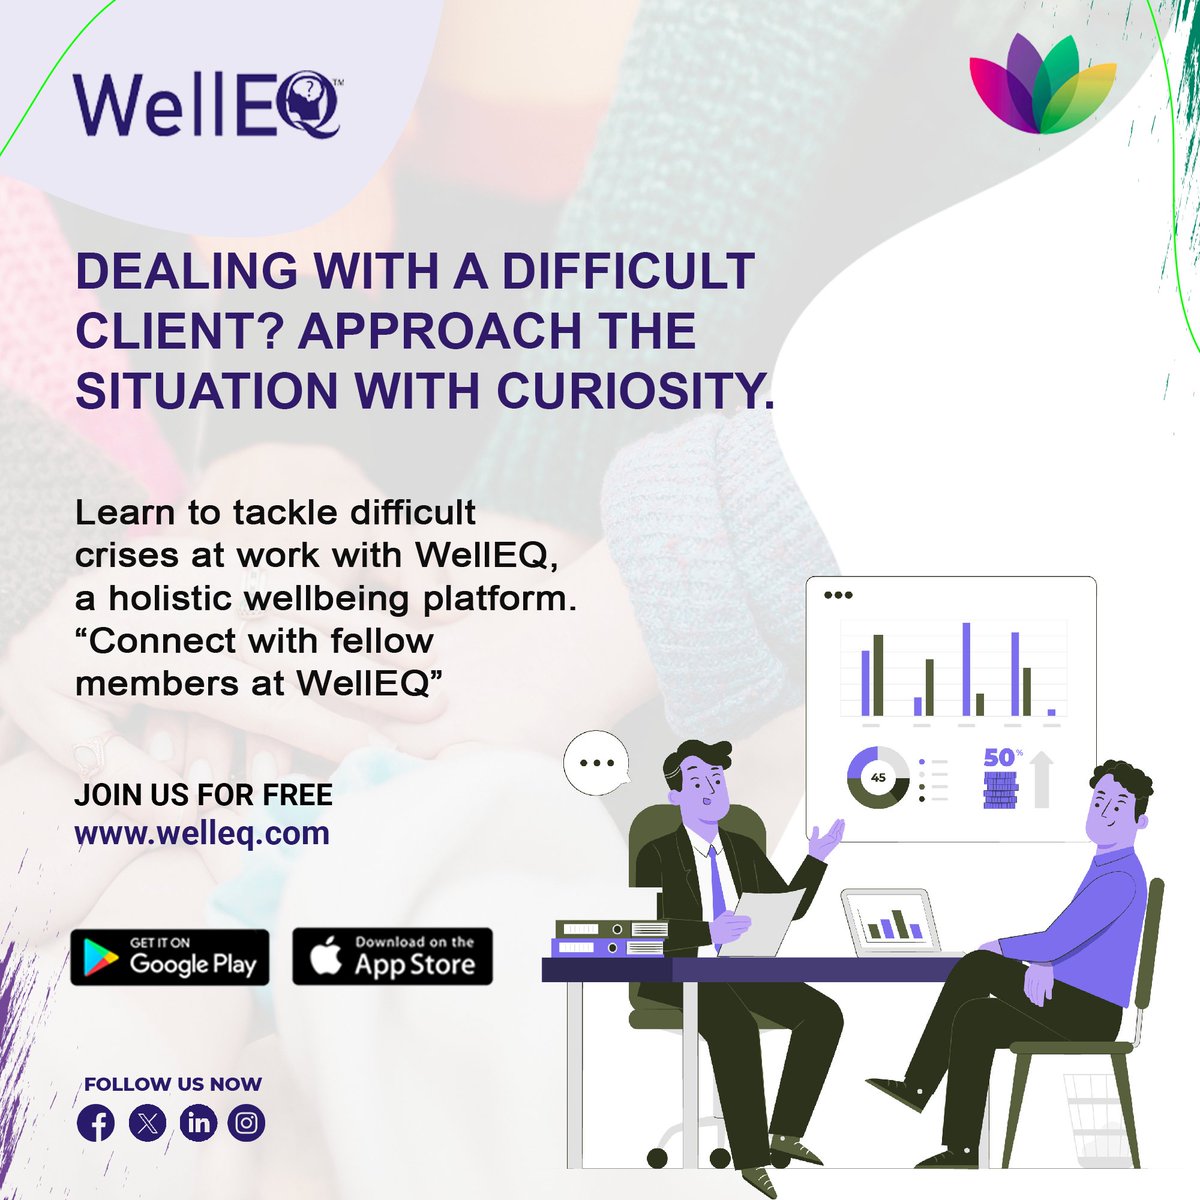 Navigate workplace challenges with WellEQ. Approach difficult situations with curiosity, connect with peers, and enhance your professional journey. 
.
.
#WellEQ #WorkplaceHealth #ProfessionalDevelopment #HolisticHealth #Curiosity #ClientManagement #StressRelief #PersonalGrowth